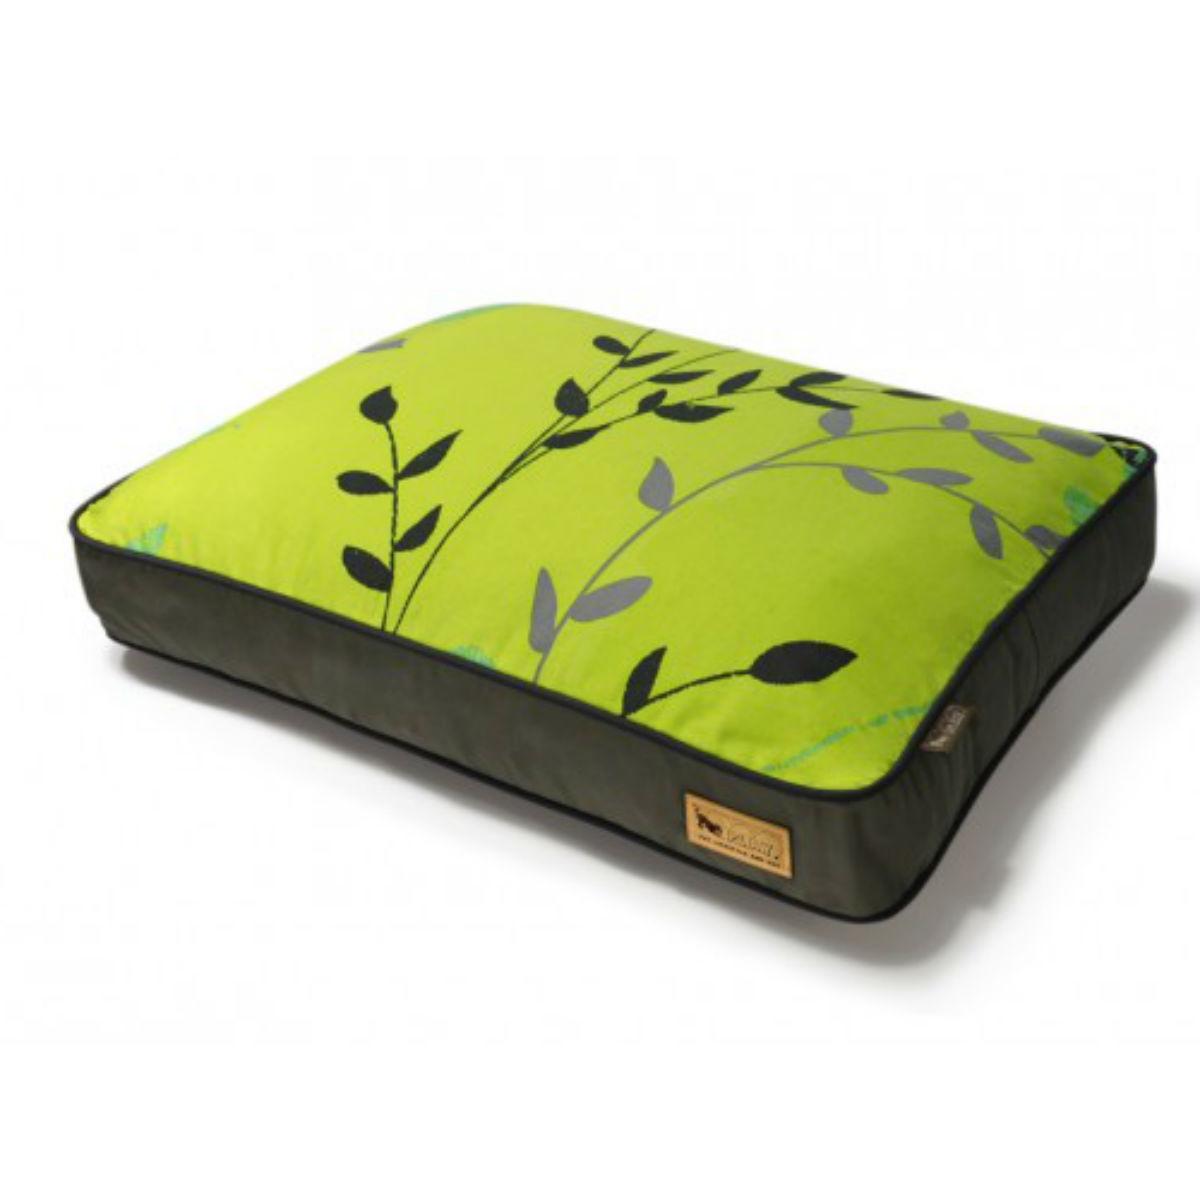 P.L.A.Y. Greenery Rectangular Dog Bed - Pear and Rifle Green